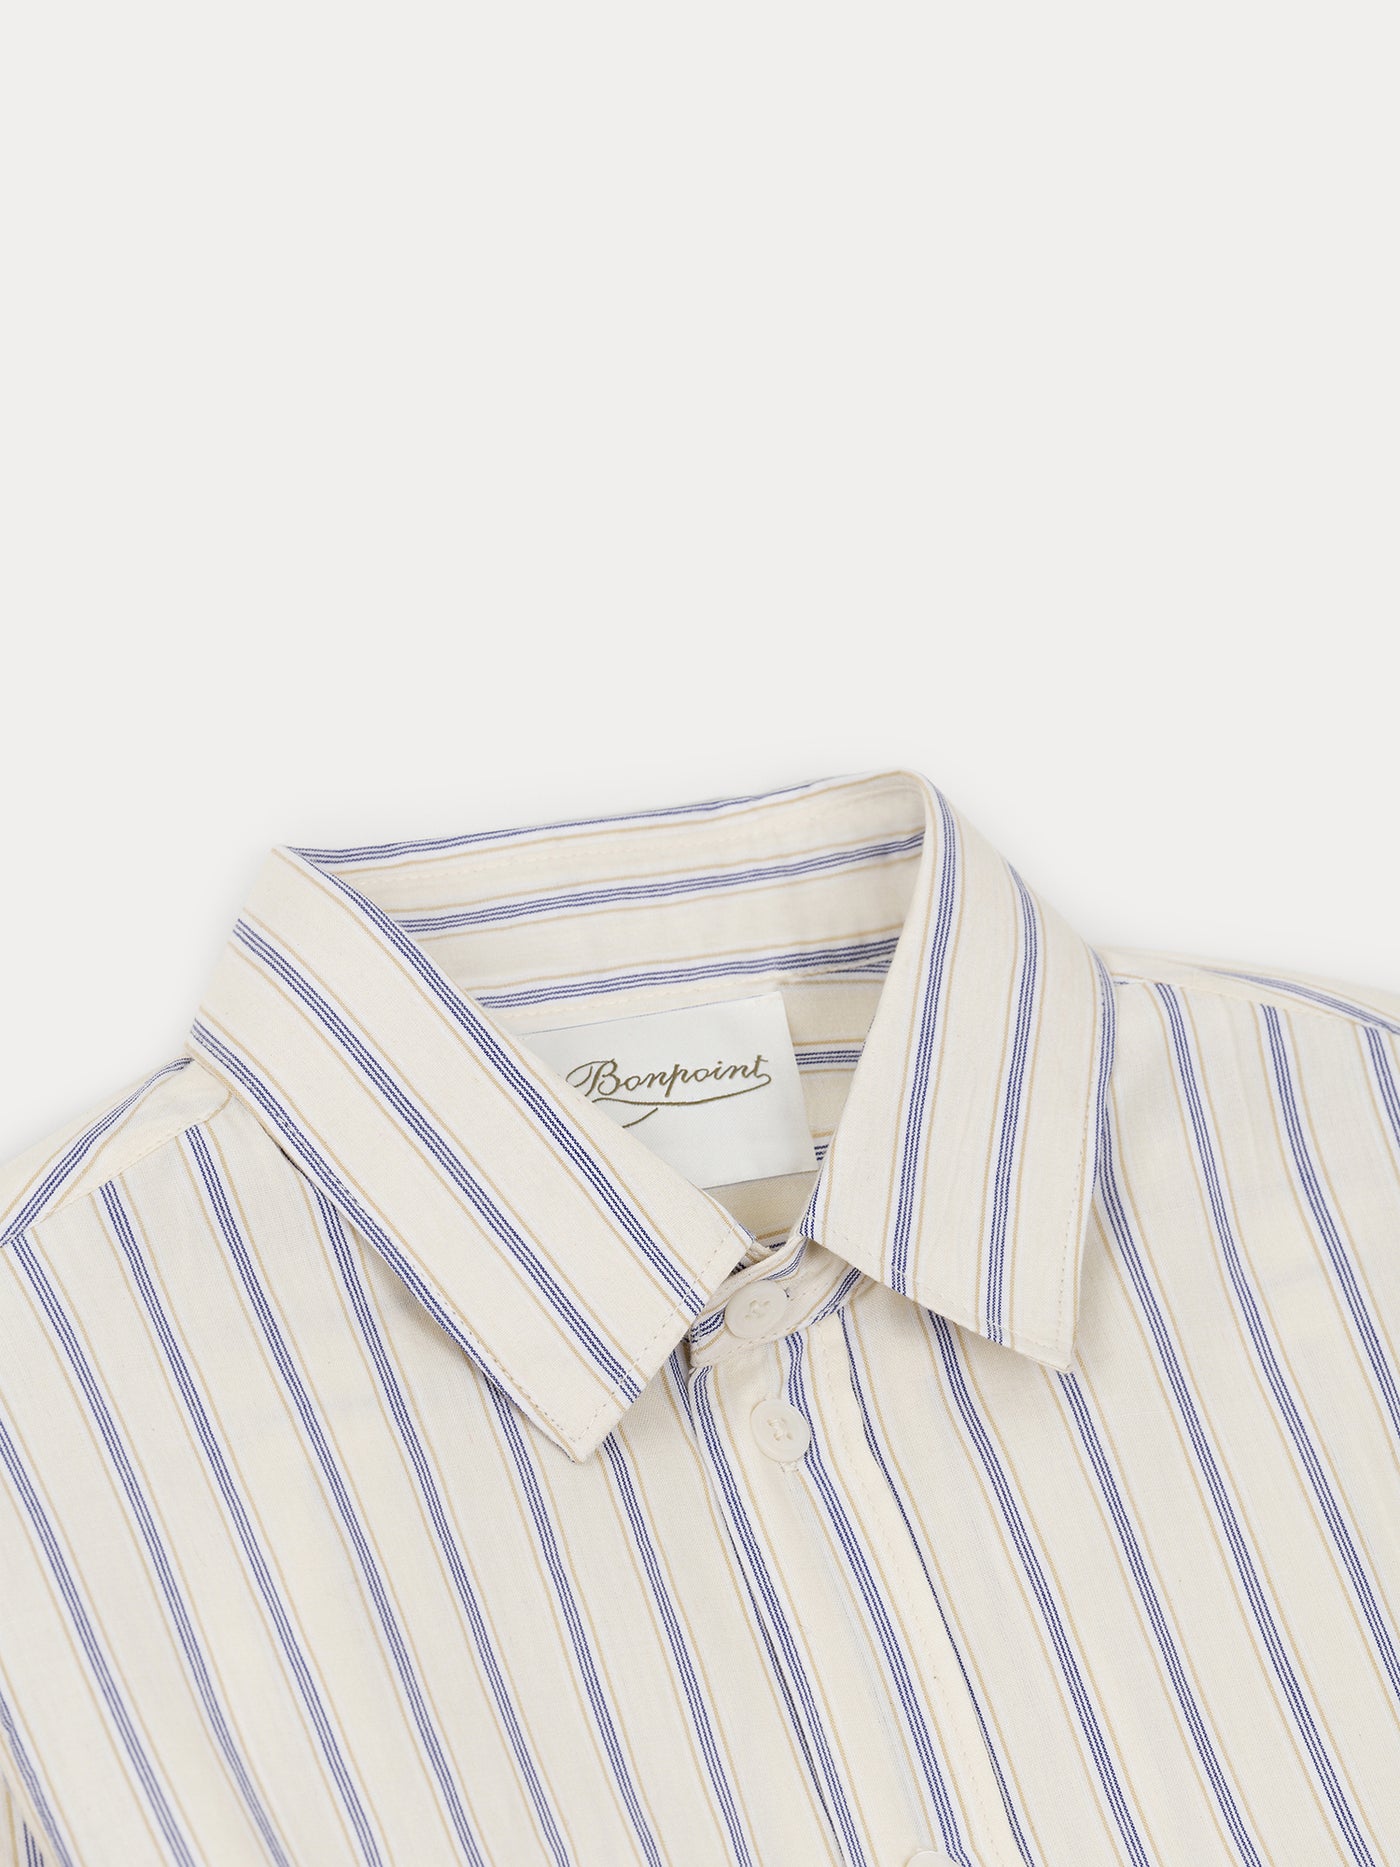 Off-white and blue striped shirt in cotton